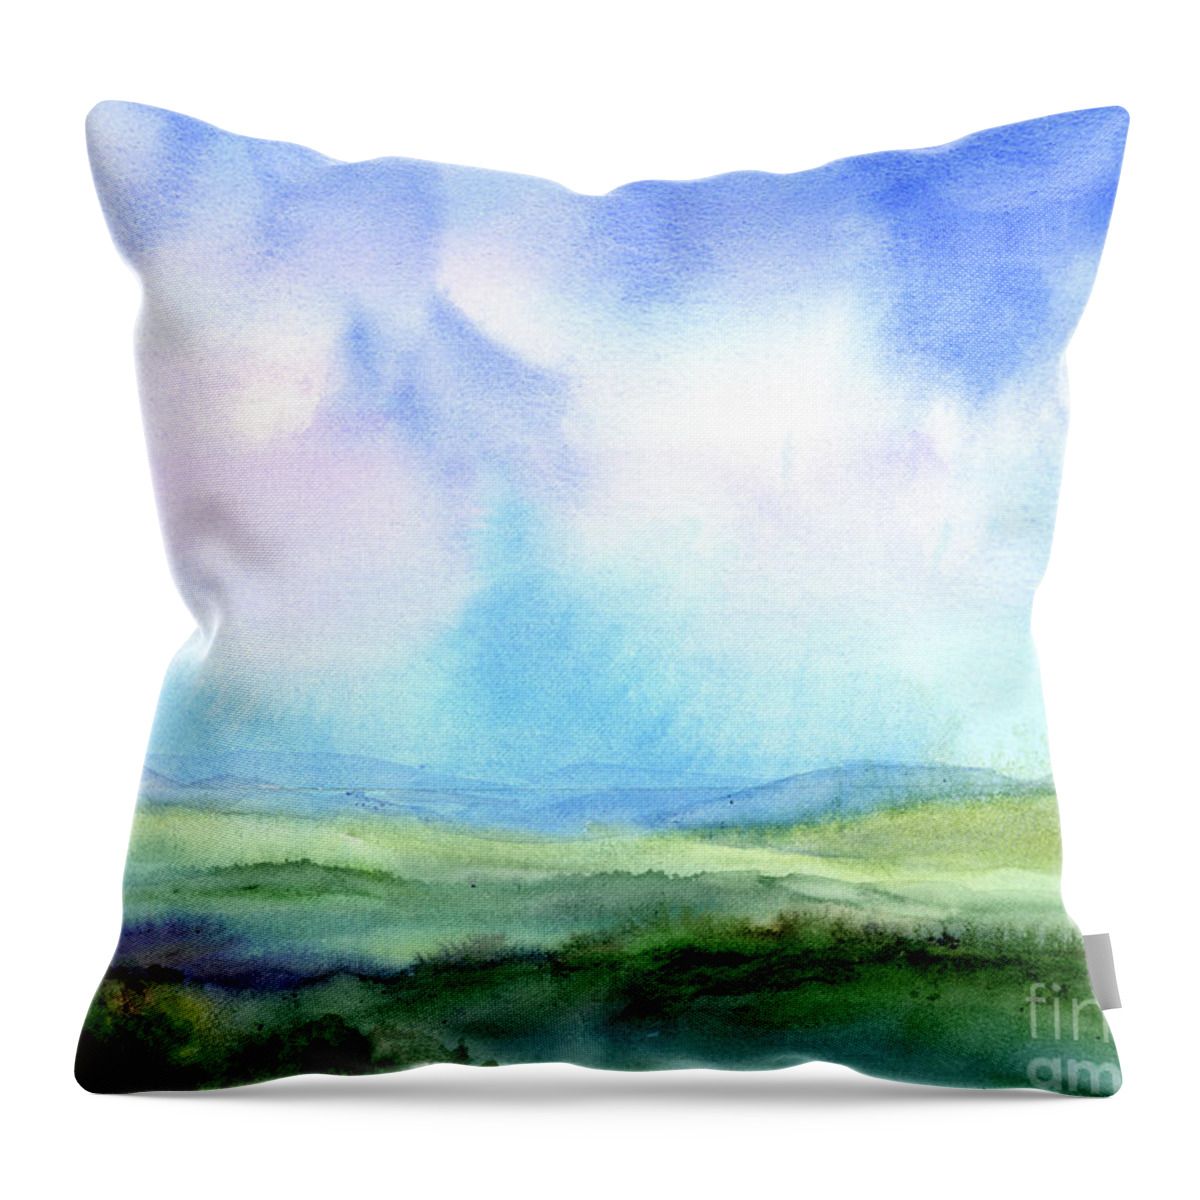 Watercolor Throw Pillow featuring the painting Dreamy by Lois Blasberg